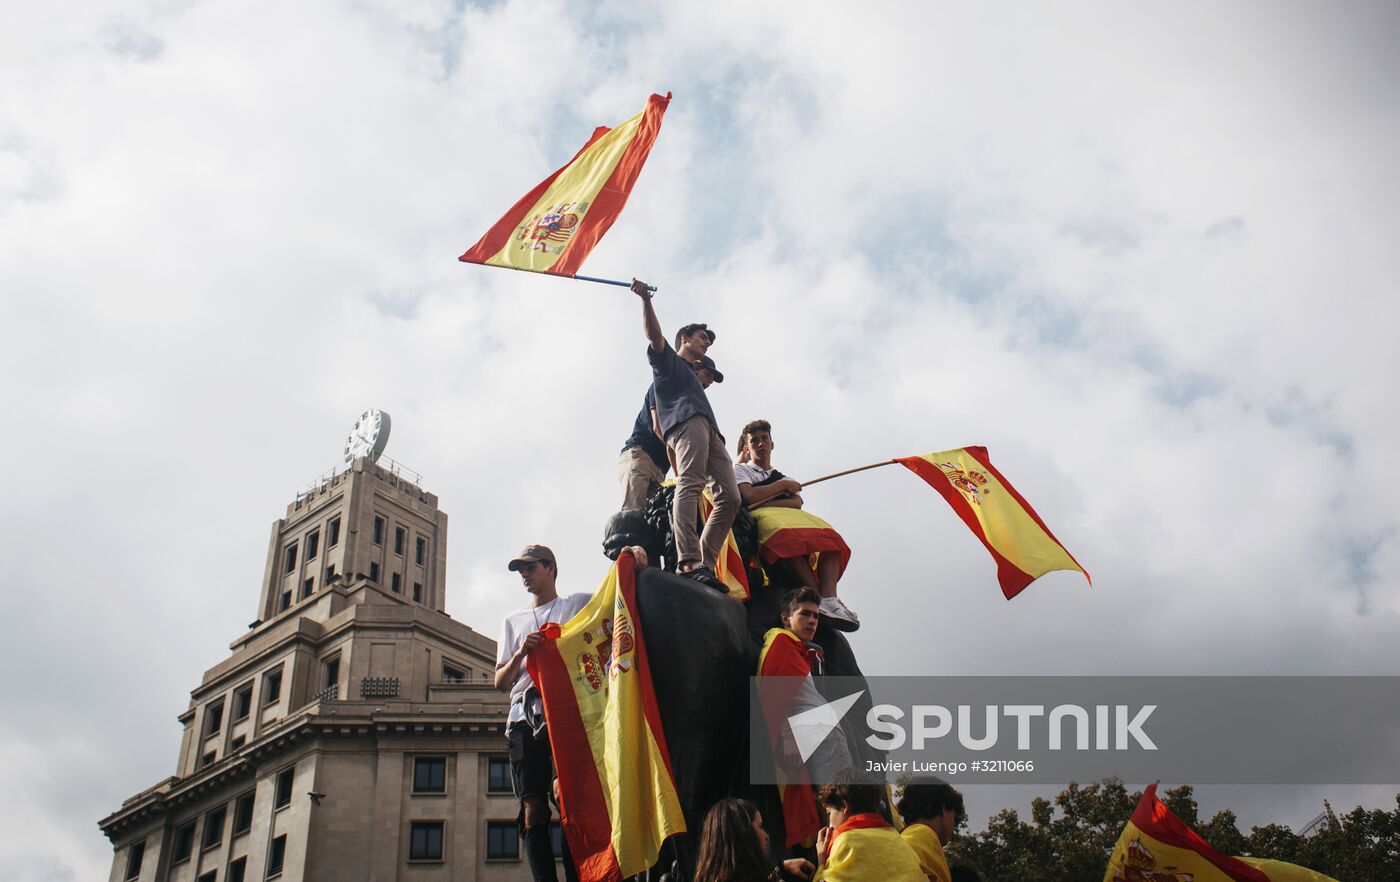 Rally for Spain's unity in Barcelona